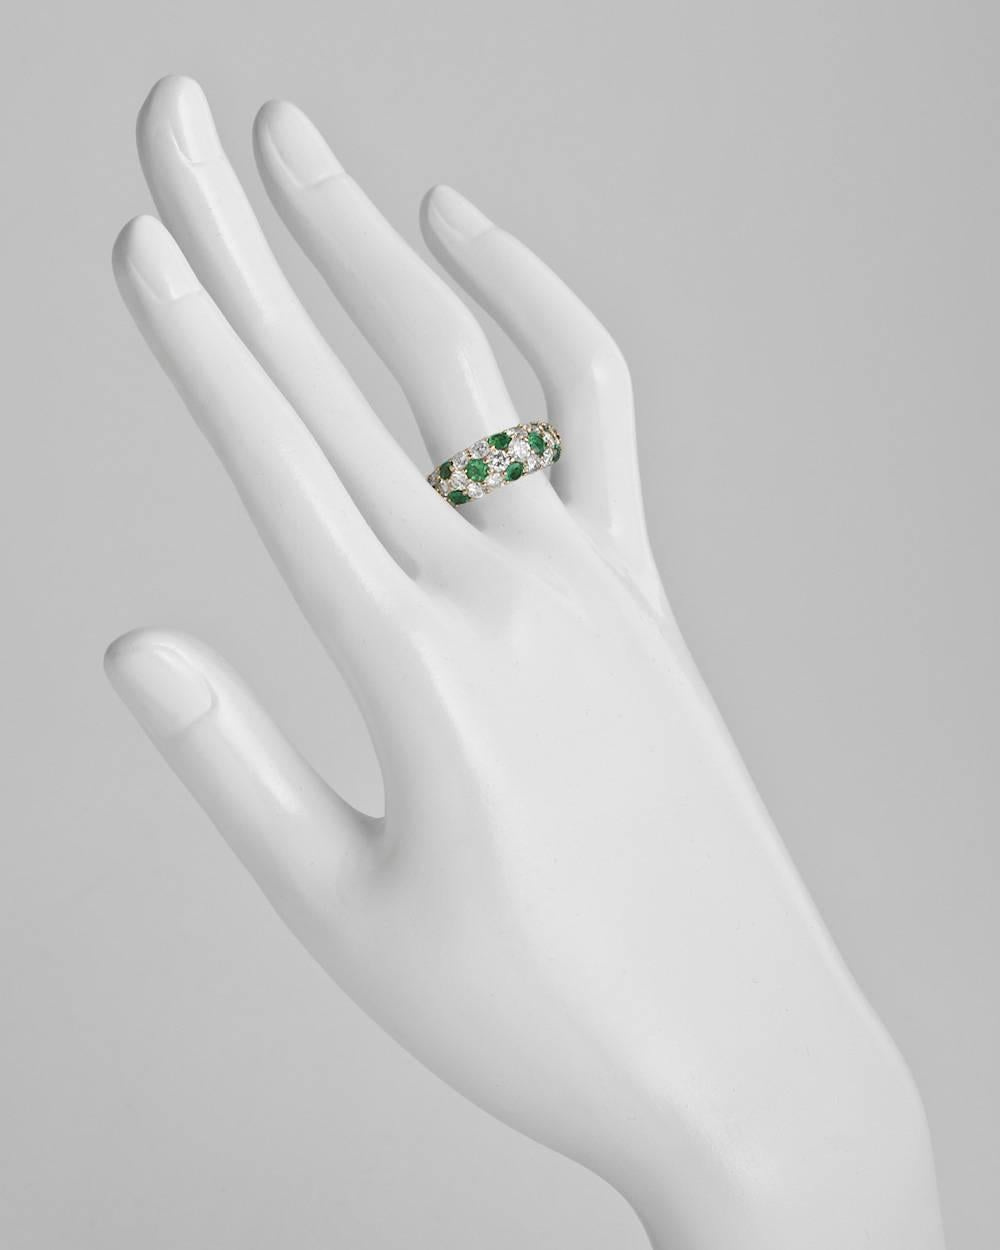 Wide domed band ring, partway-set with round emeralds and round brilliant-cut diamonds, mounted in 18k yellow gold. Emeralds weighing approximately 0.96 total carats and diamonds weighing approximately 1.64 total carats. 4.5mm band width. Size 7.